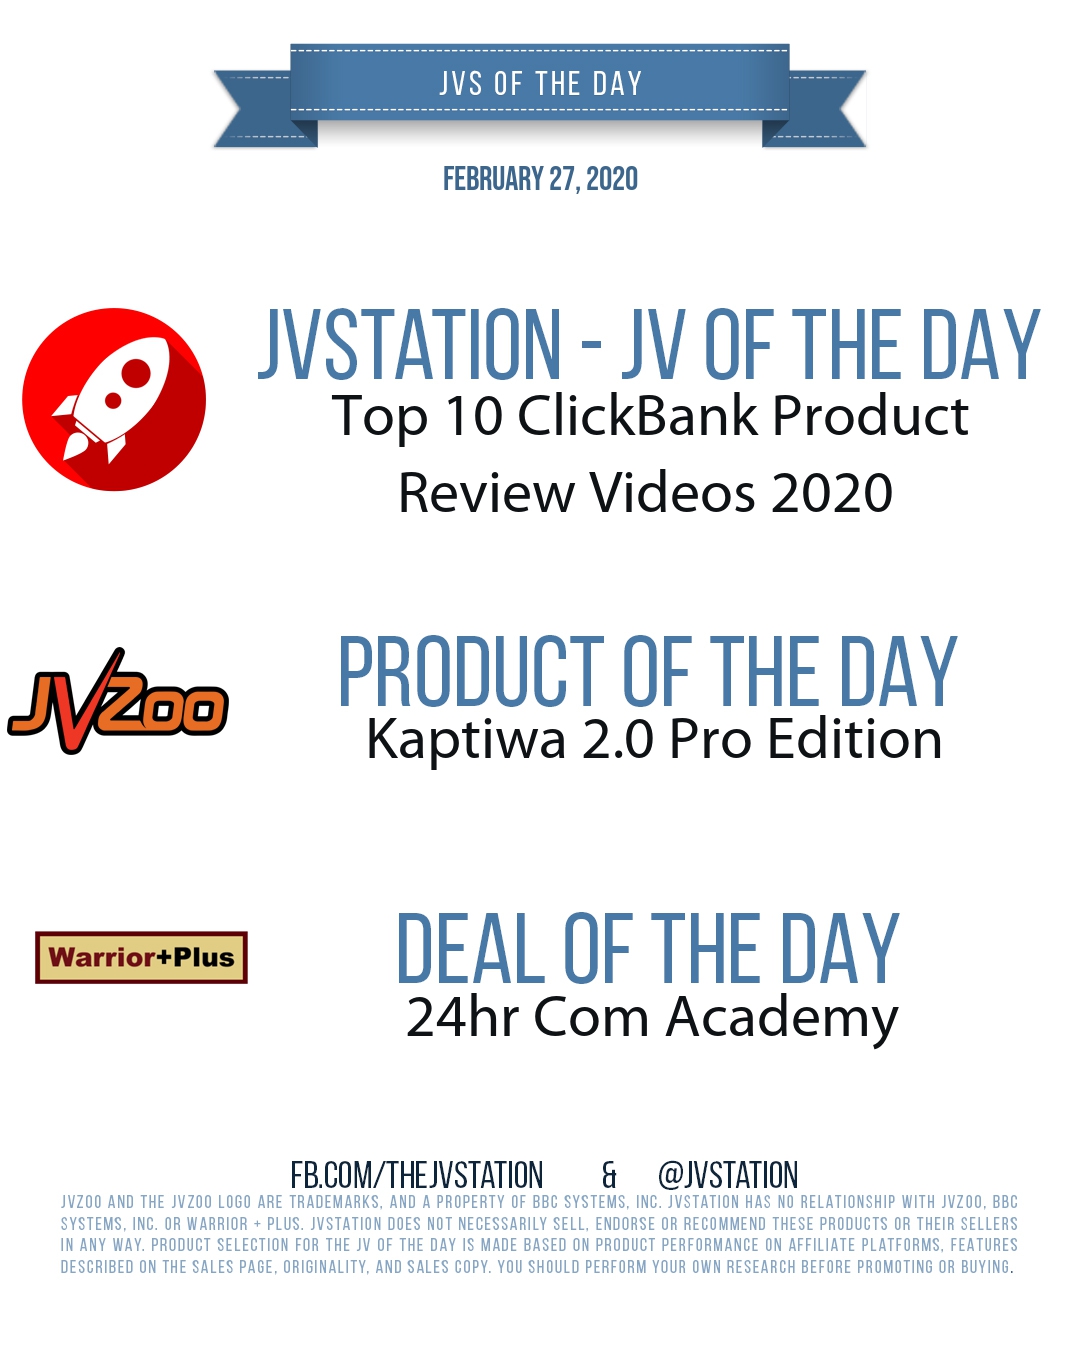 JVs of the day - February 27, 2020